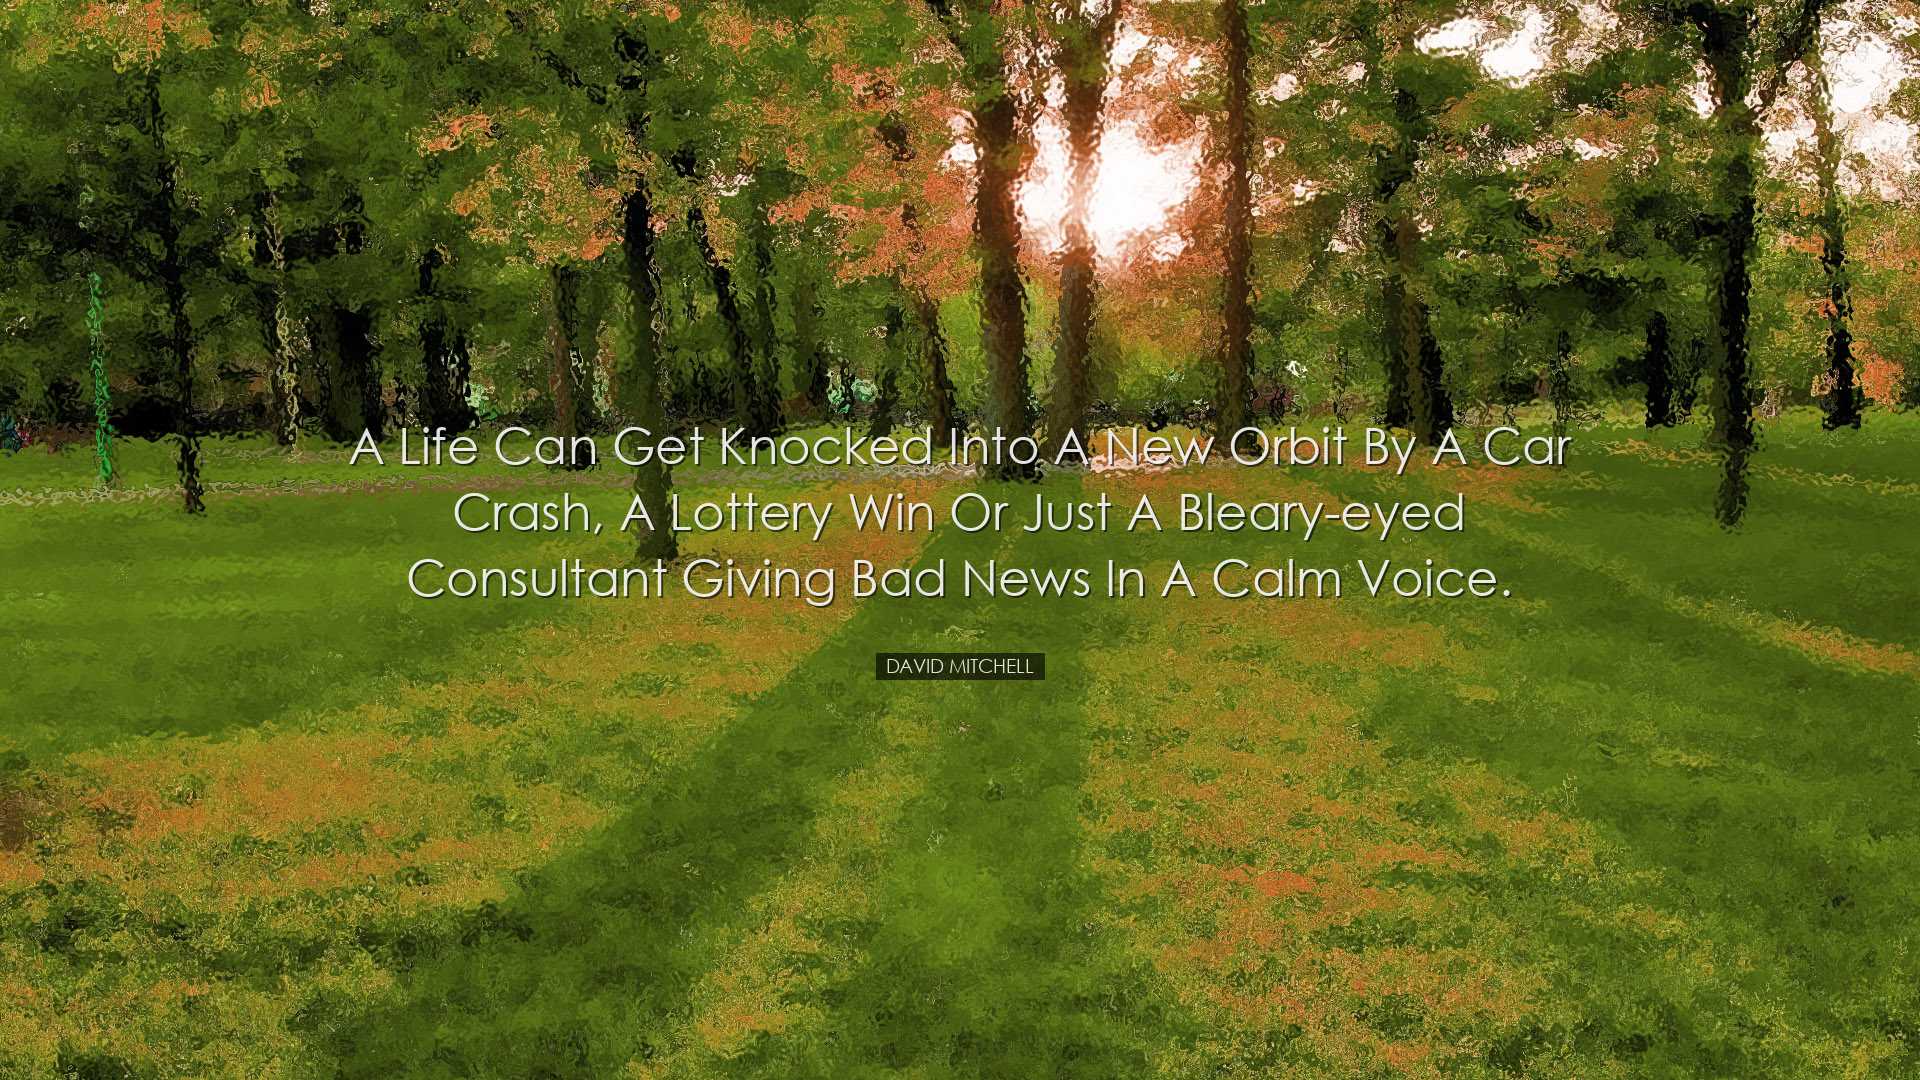 A life can get knocked into a new orbit by a car crash, a lottery